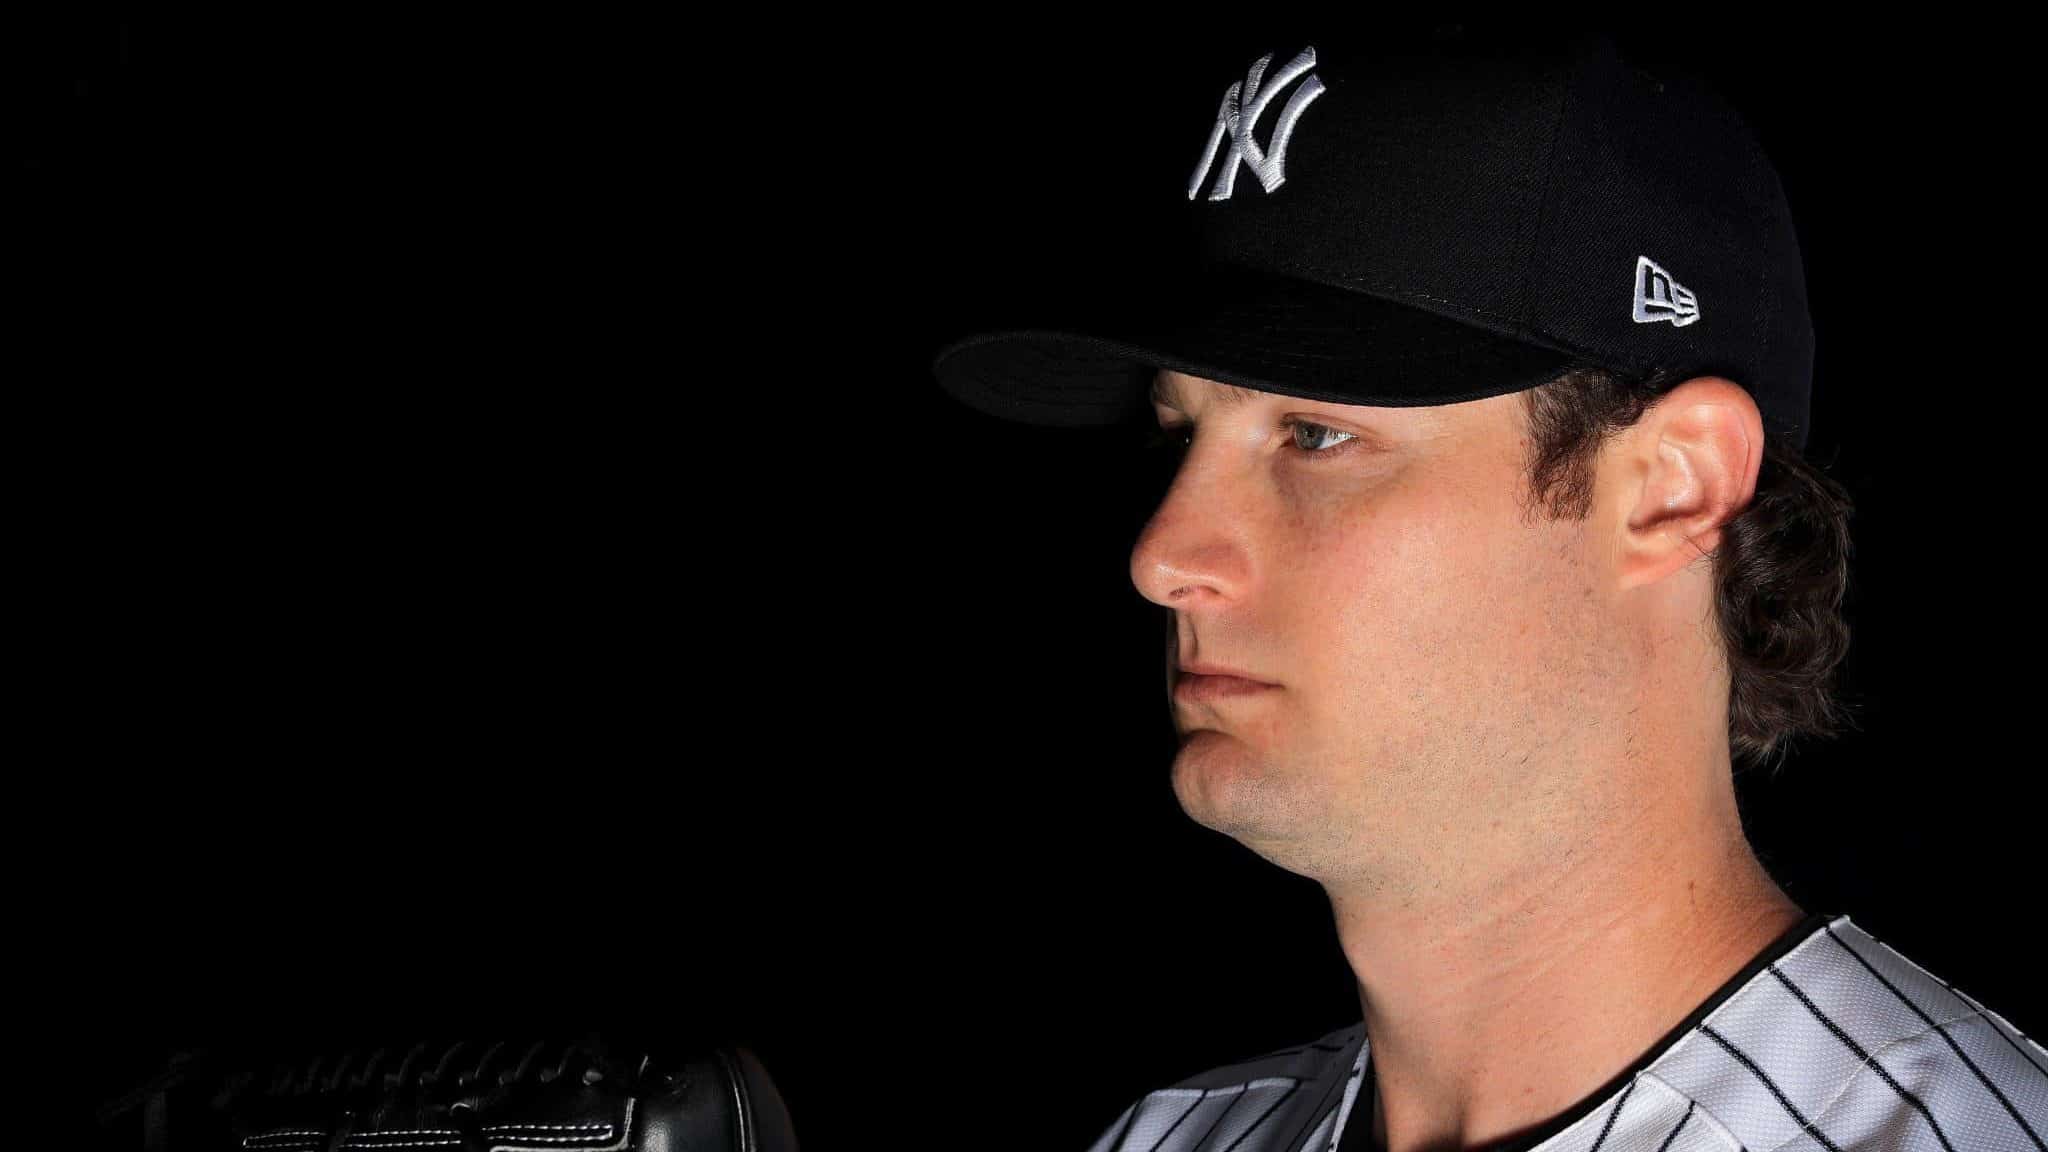 TAMPA, FLORIDA - FEBRUARY 20: Gerrit Cole #45 of the New York Yankees poses for a portrait during photo day on February 20, 2020 in Tampa, Florida.